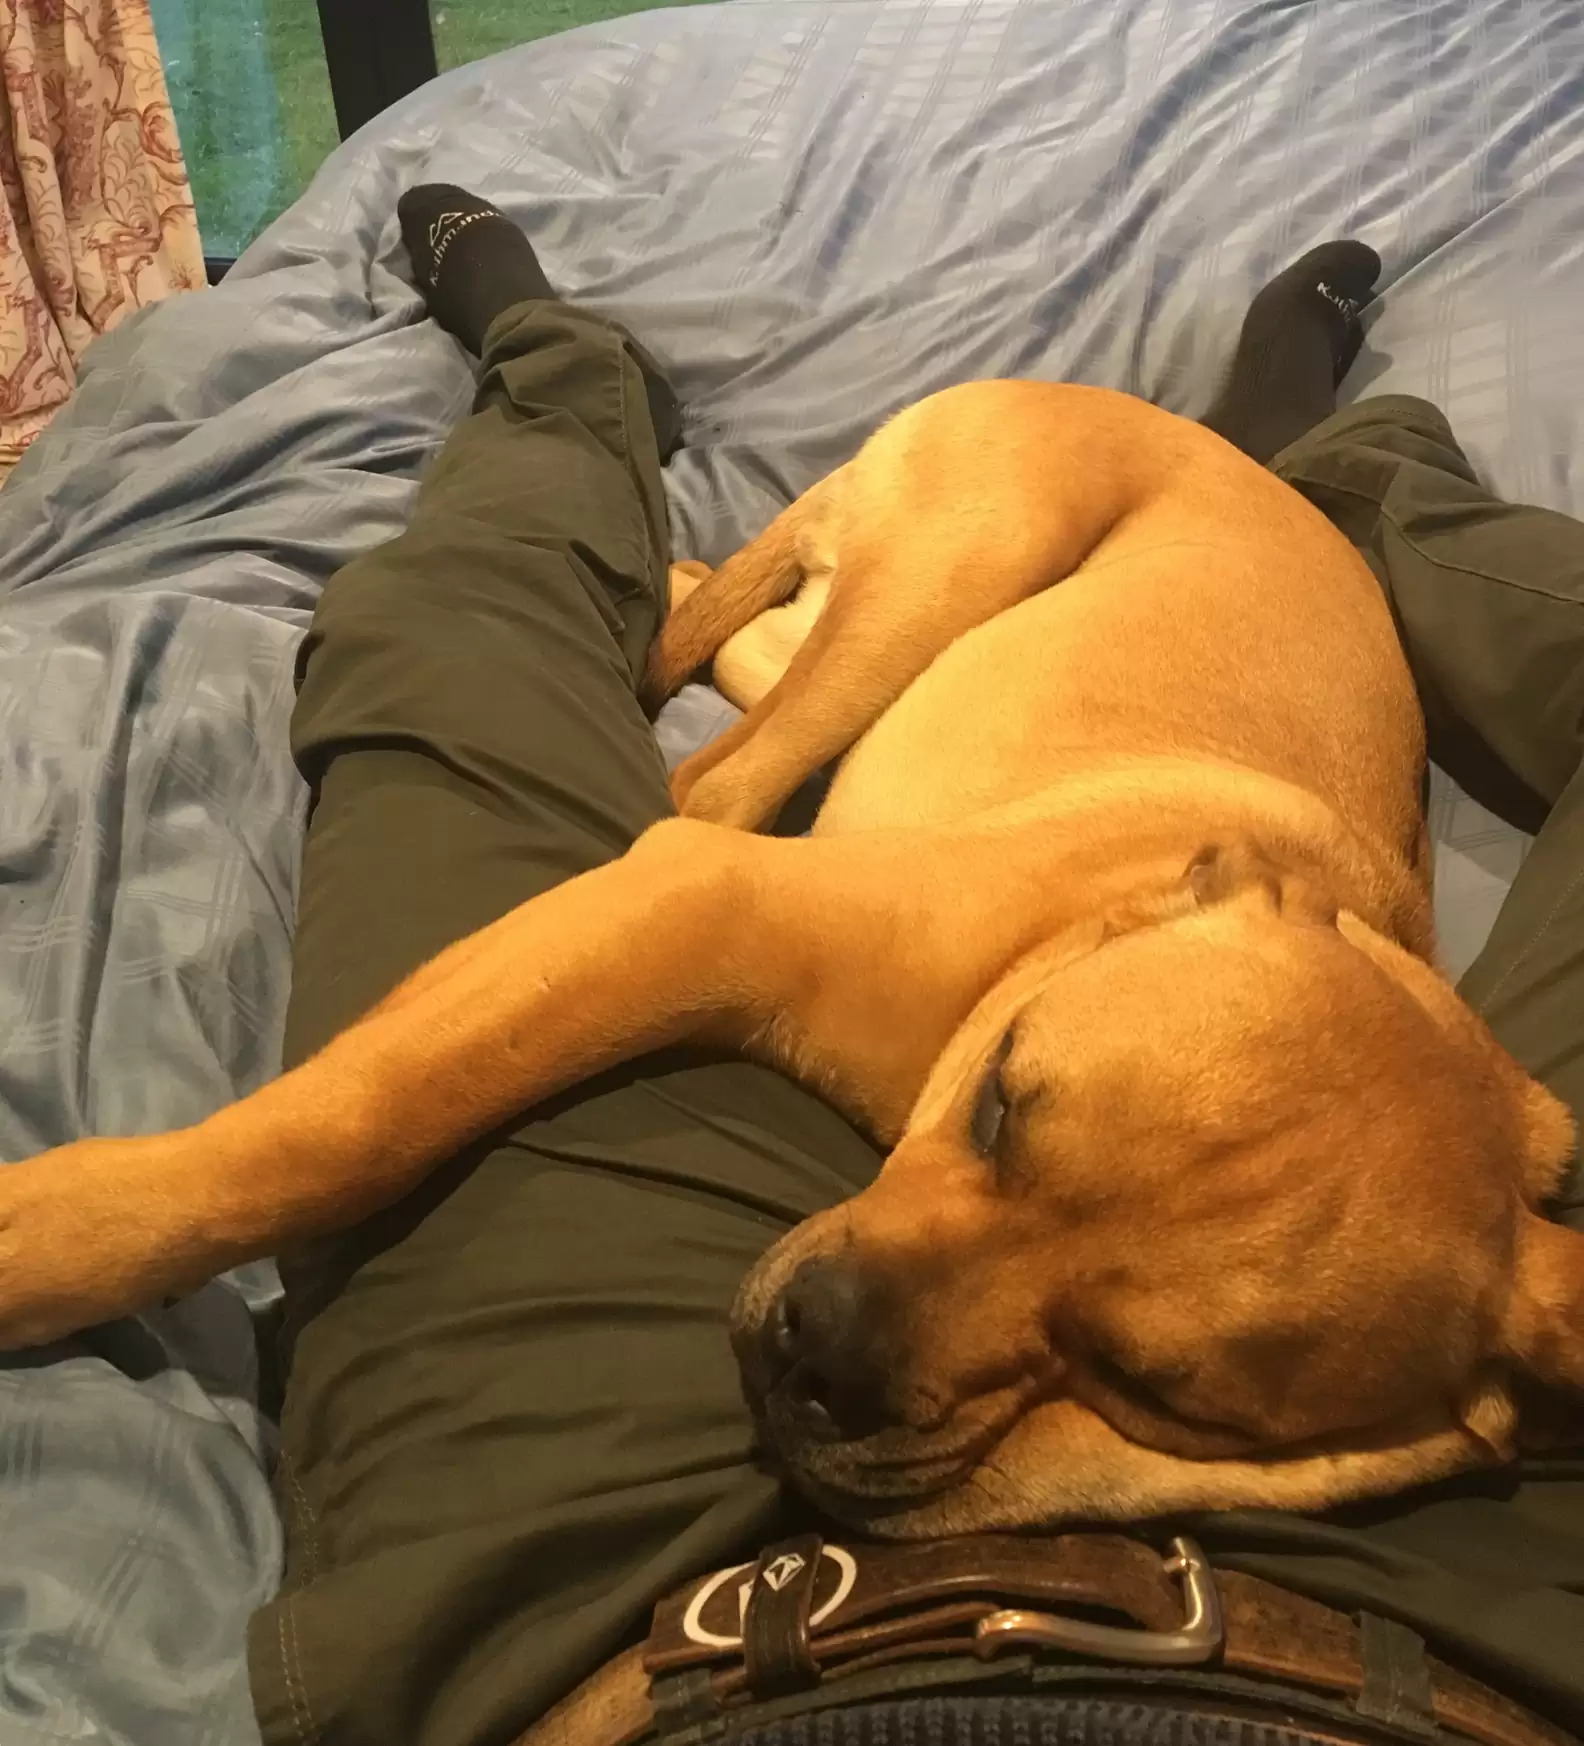 abandoned dog lying on man in bed